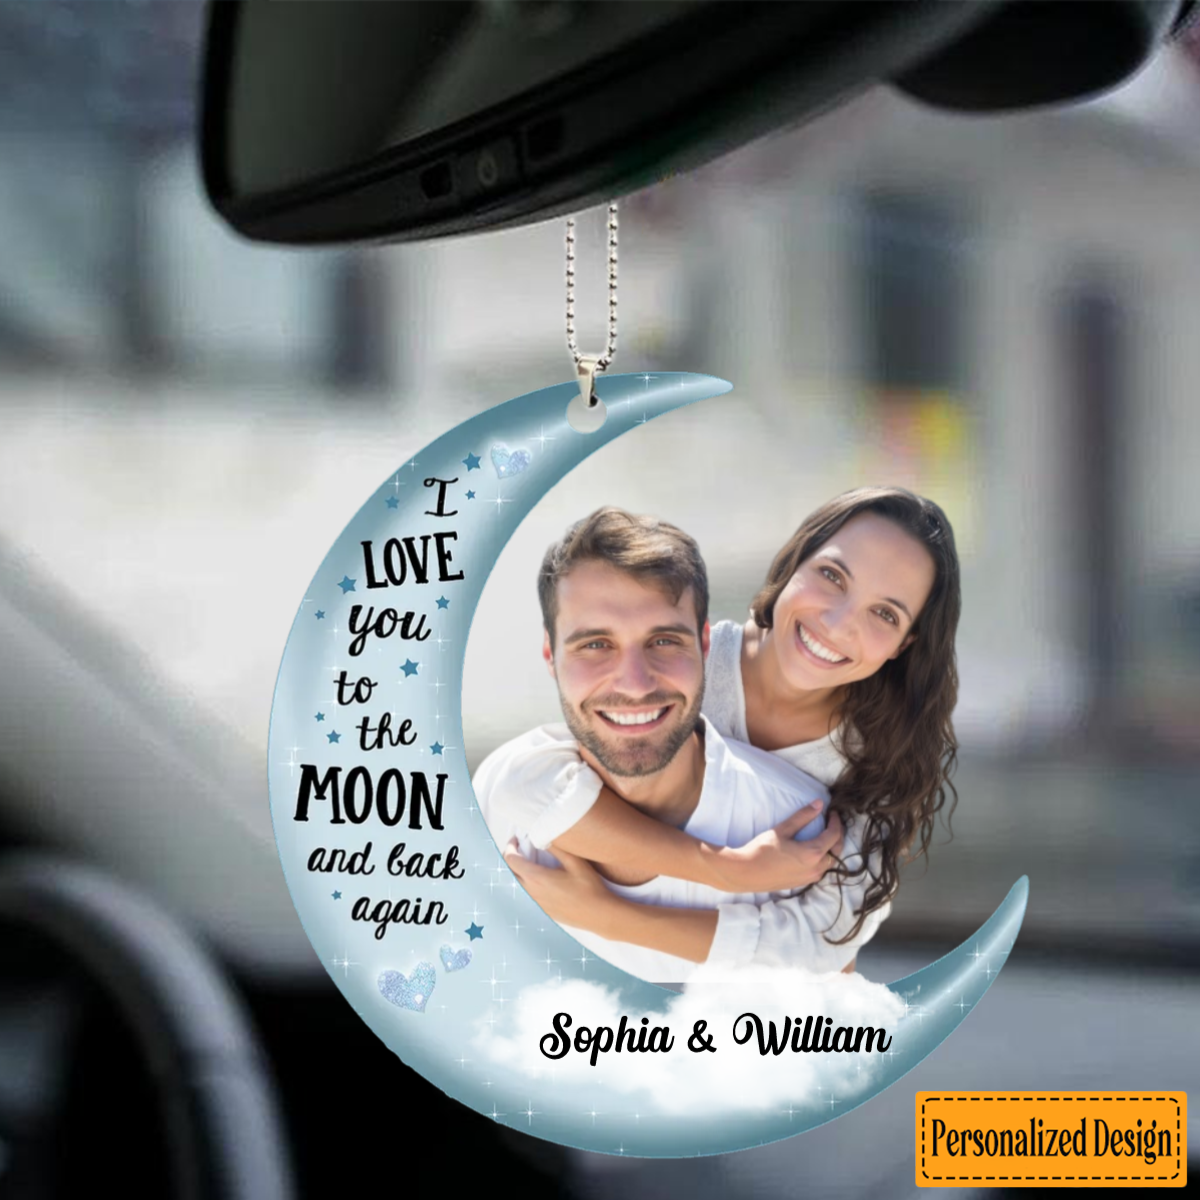 Personalized Couple Ornament - I love you to the moon and back again